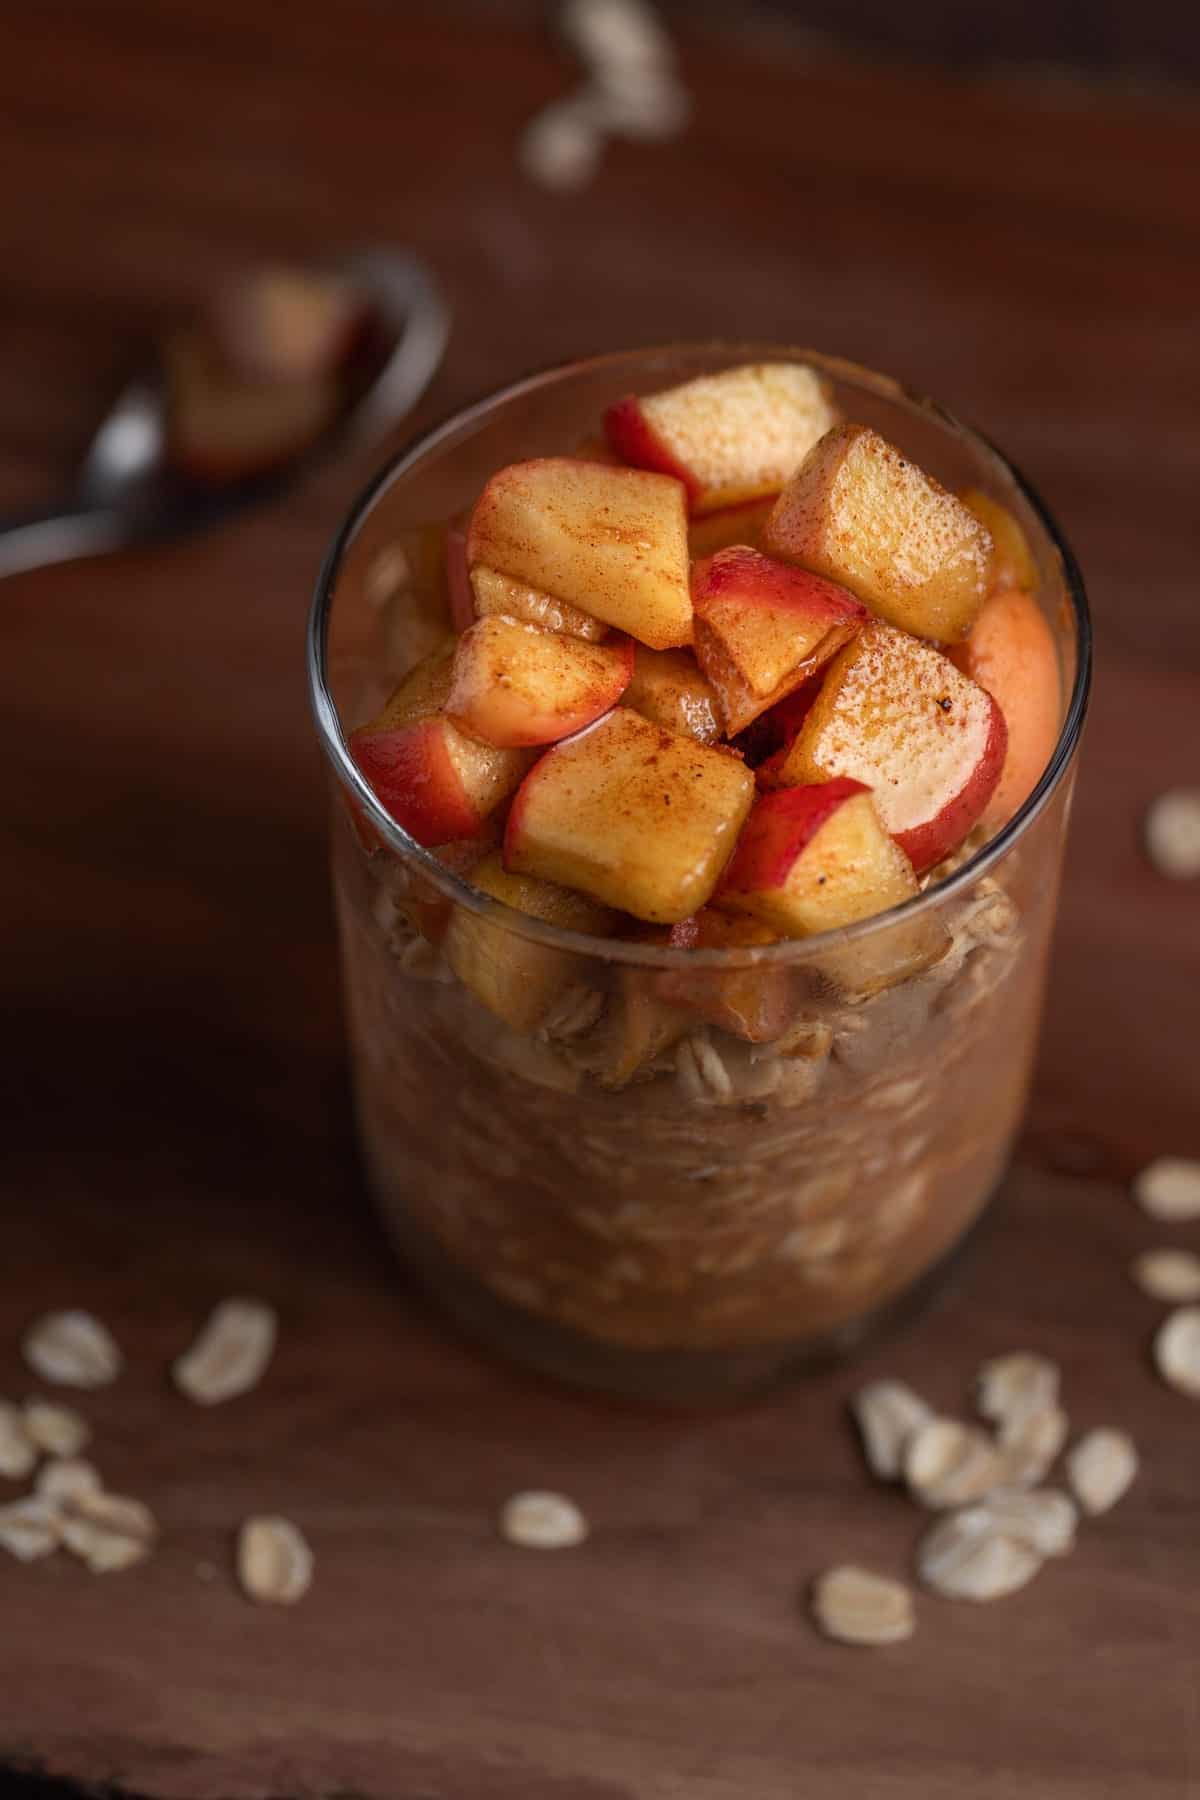 Apple pie overnight oats with diced apples on top served in a glass.